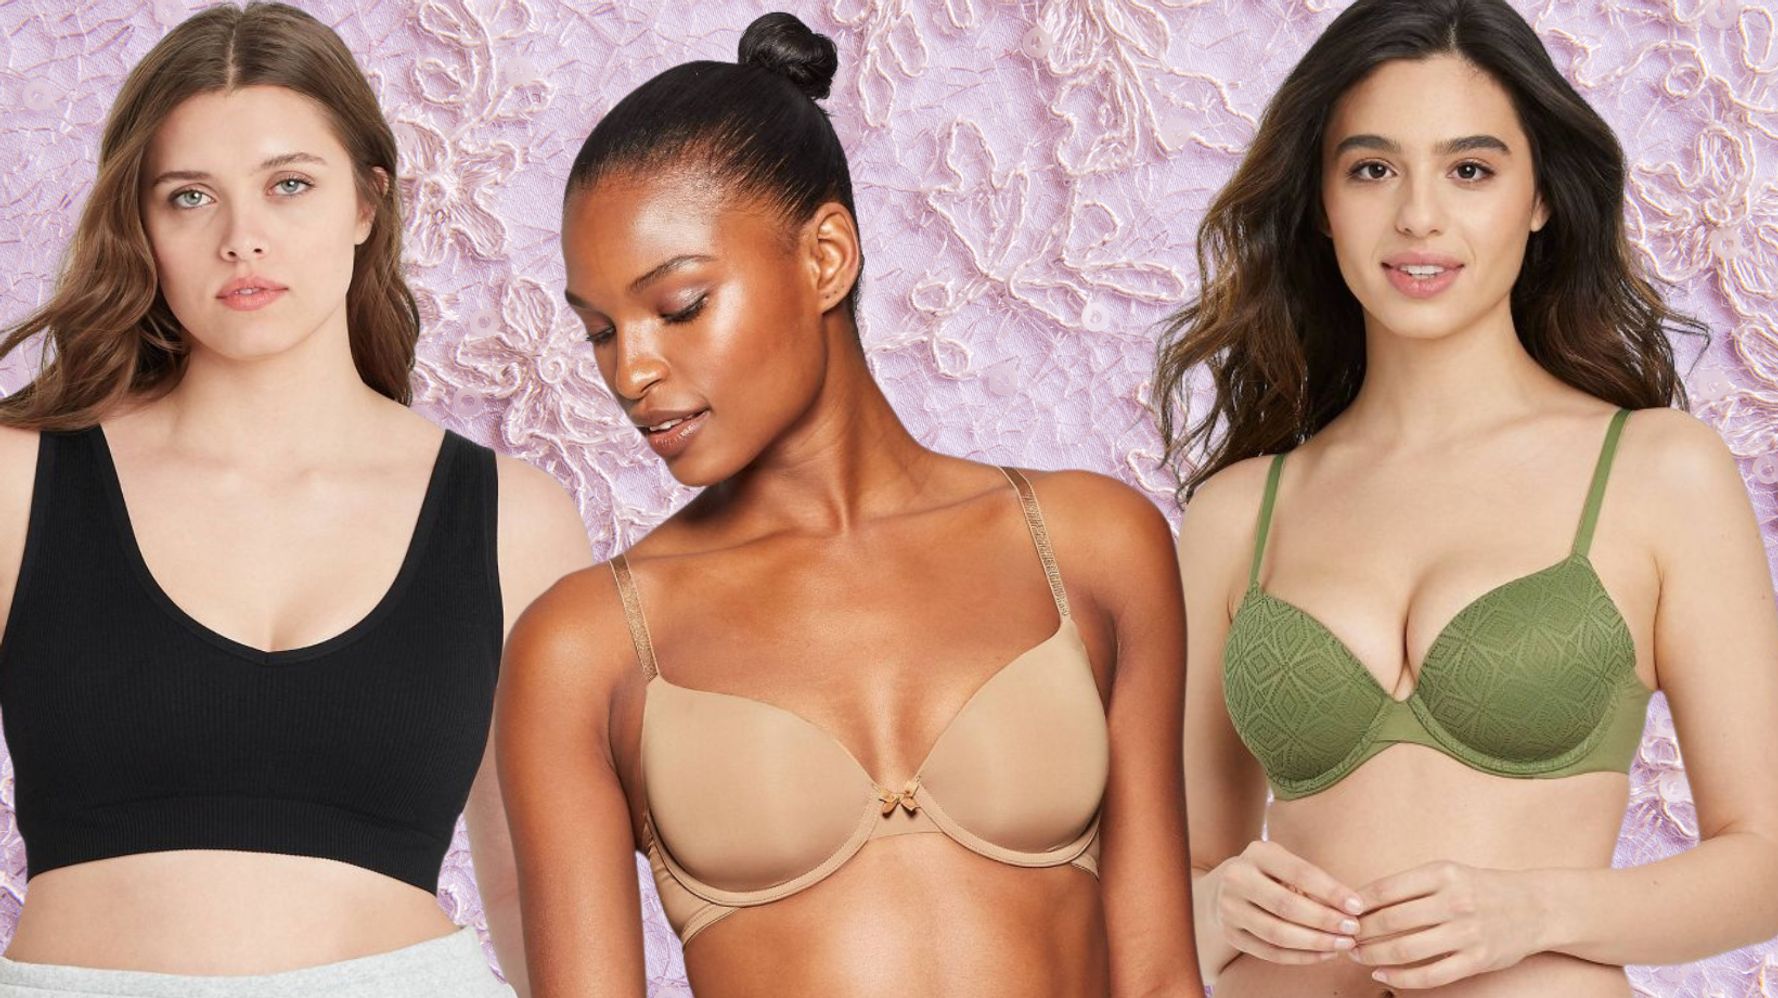 This is the best, most comfortable bra for people who hate wearing